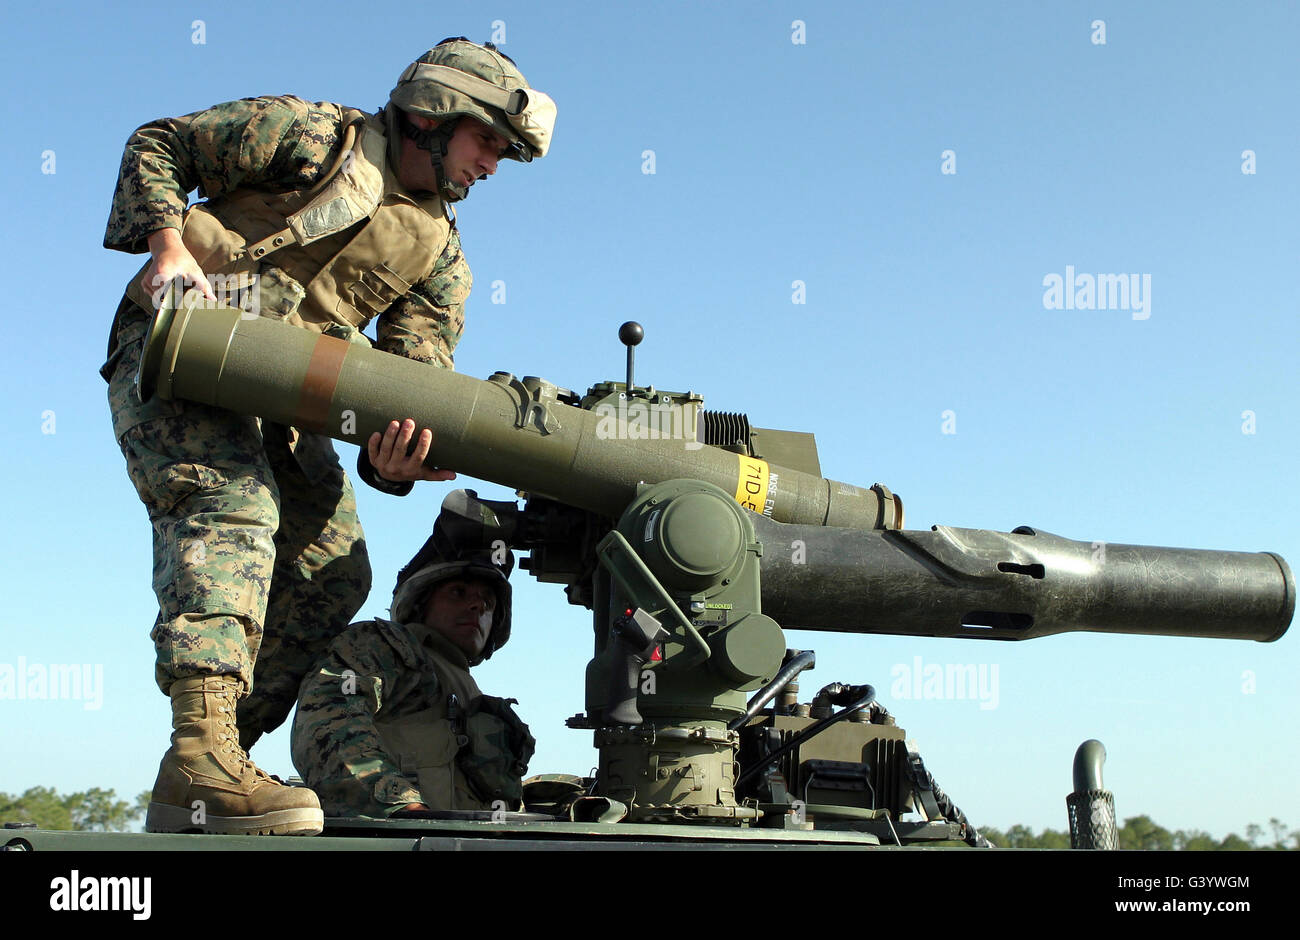 A marine loads a missile into a tube-launched, wire command-link guided missile system. Stock Photo